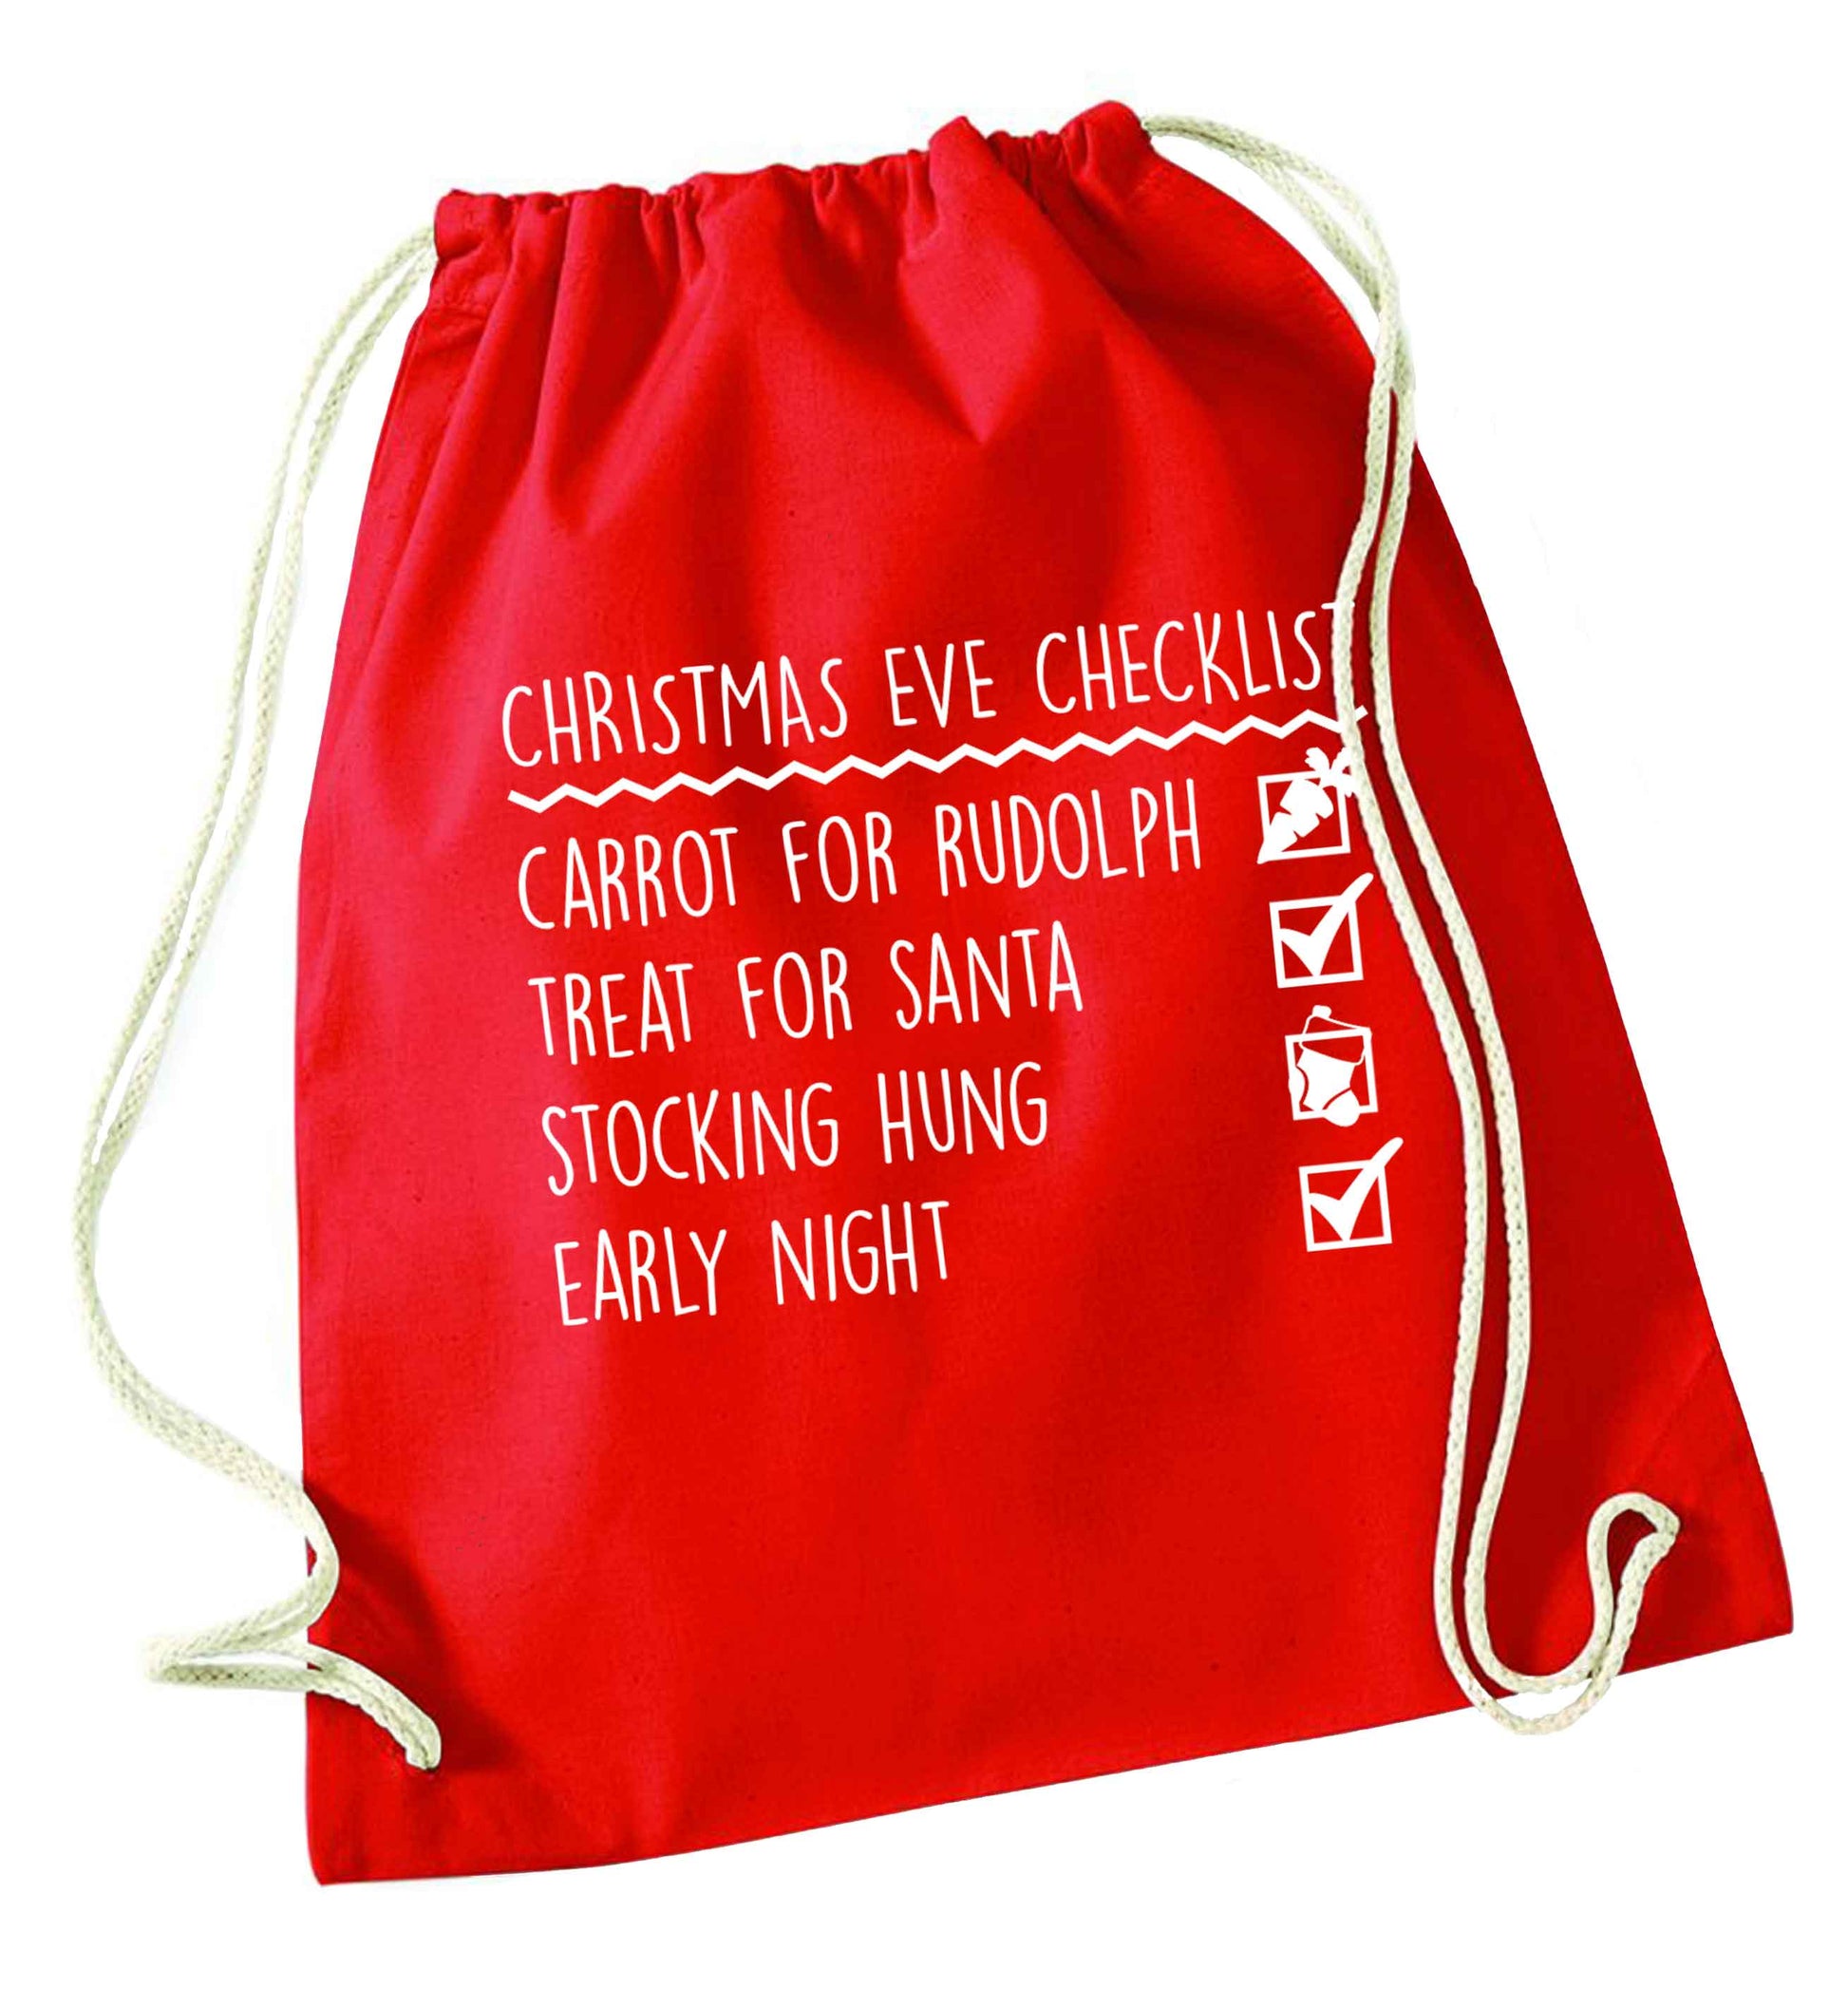 Candy Canes Candy Corns red drawstring bag 